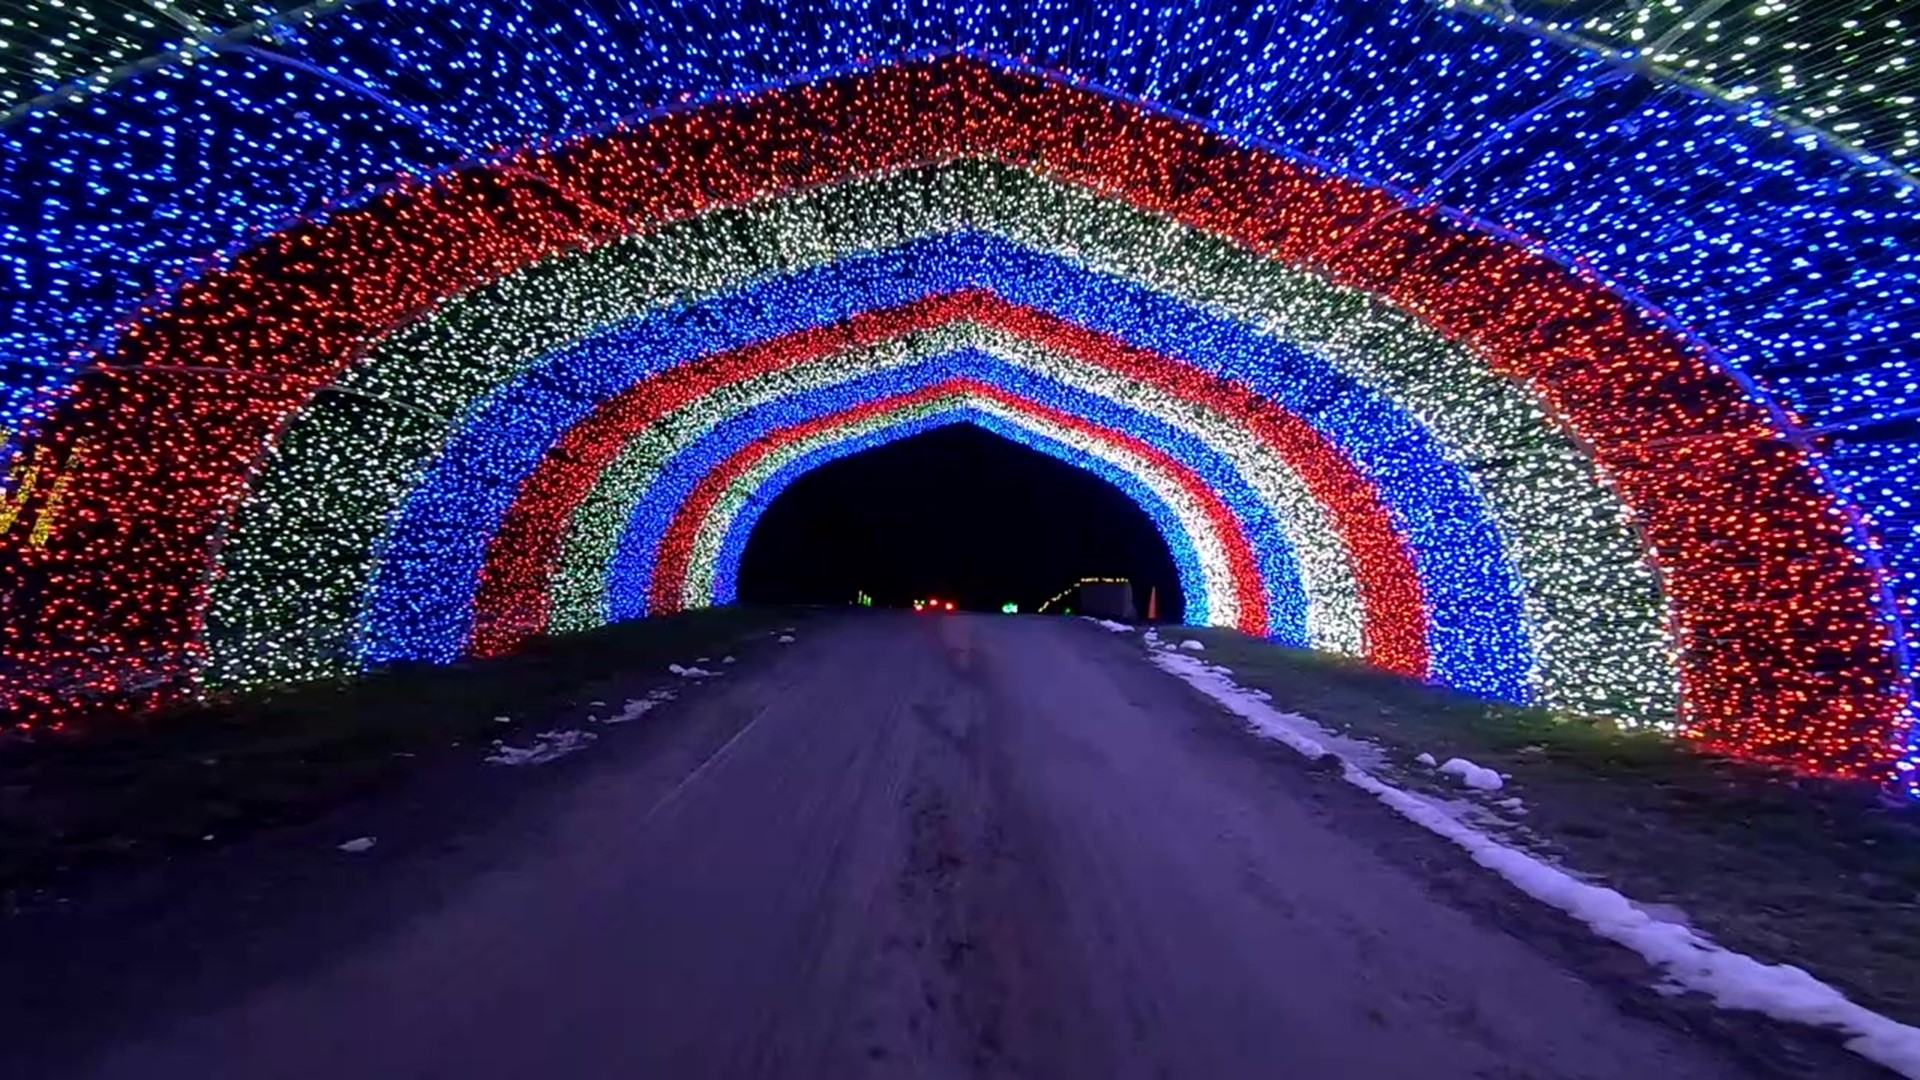 Thousands of lights draw thousands of visitors to this spectacular display near Tunkhannock each year.